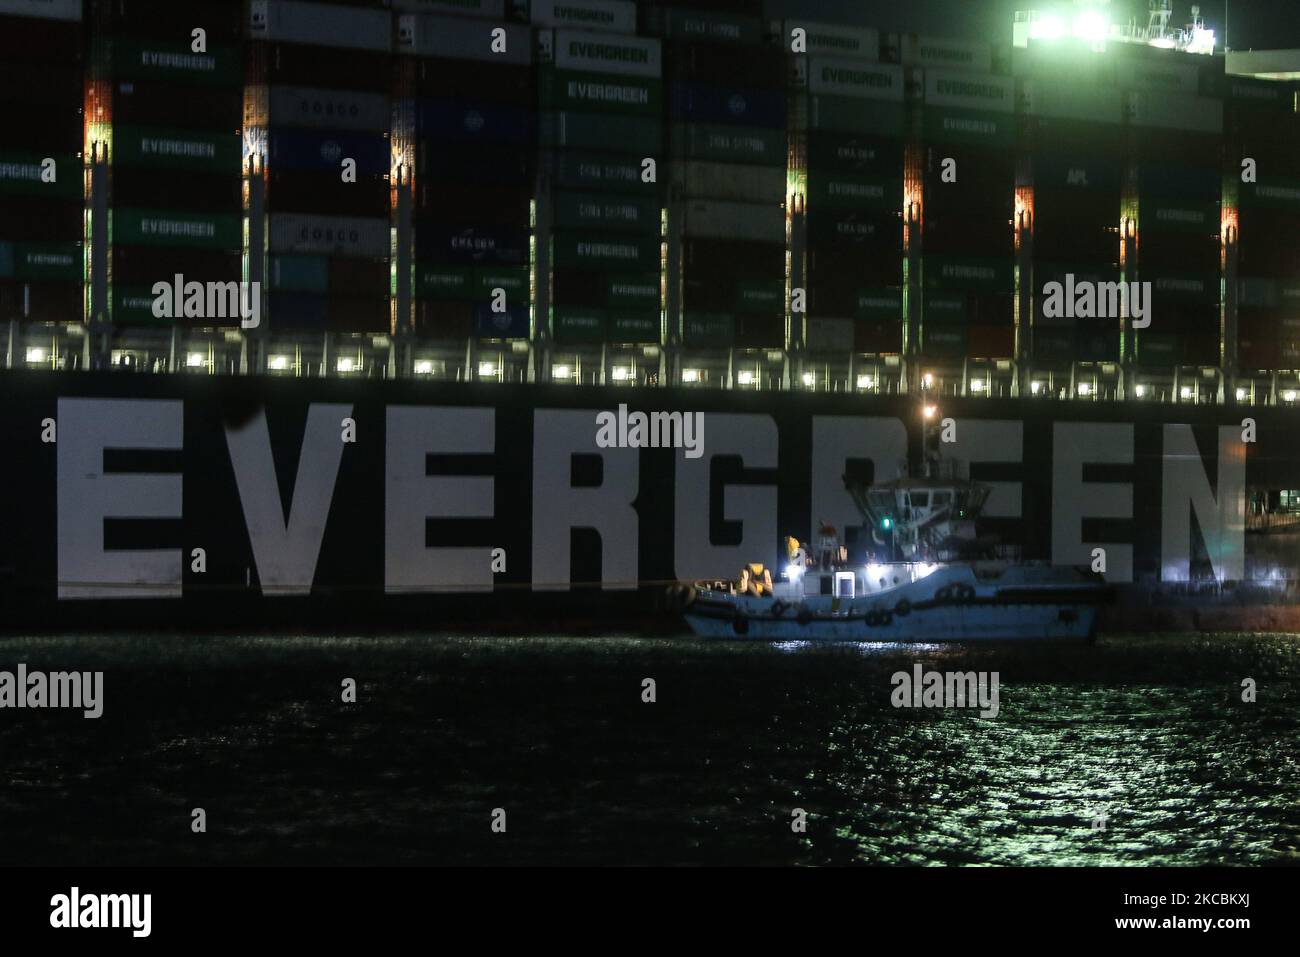 A general view of ''Ever Given'', a container ship which is currently stuck in the Suez canal, during a tugging attempt to re-float it, in Suez, Egypt, on March 27, 2021. The state-run Suez Canal Authority (SCA) announced that nearly 17,000 cubic meters of sand have been dredged around the ship after navigation through the Suez Canal has been temporarily stoped which has been wedged diagonally across the span of the canal about six kilometres north of the Suez Canal's entrance by the Red Sea port city of Suez since March 23, blocking the waterway in both directions (Photo by Ziad Ahmed/NurPhot Stock Photo